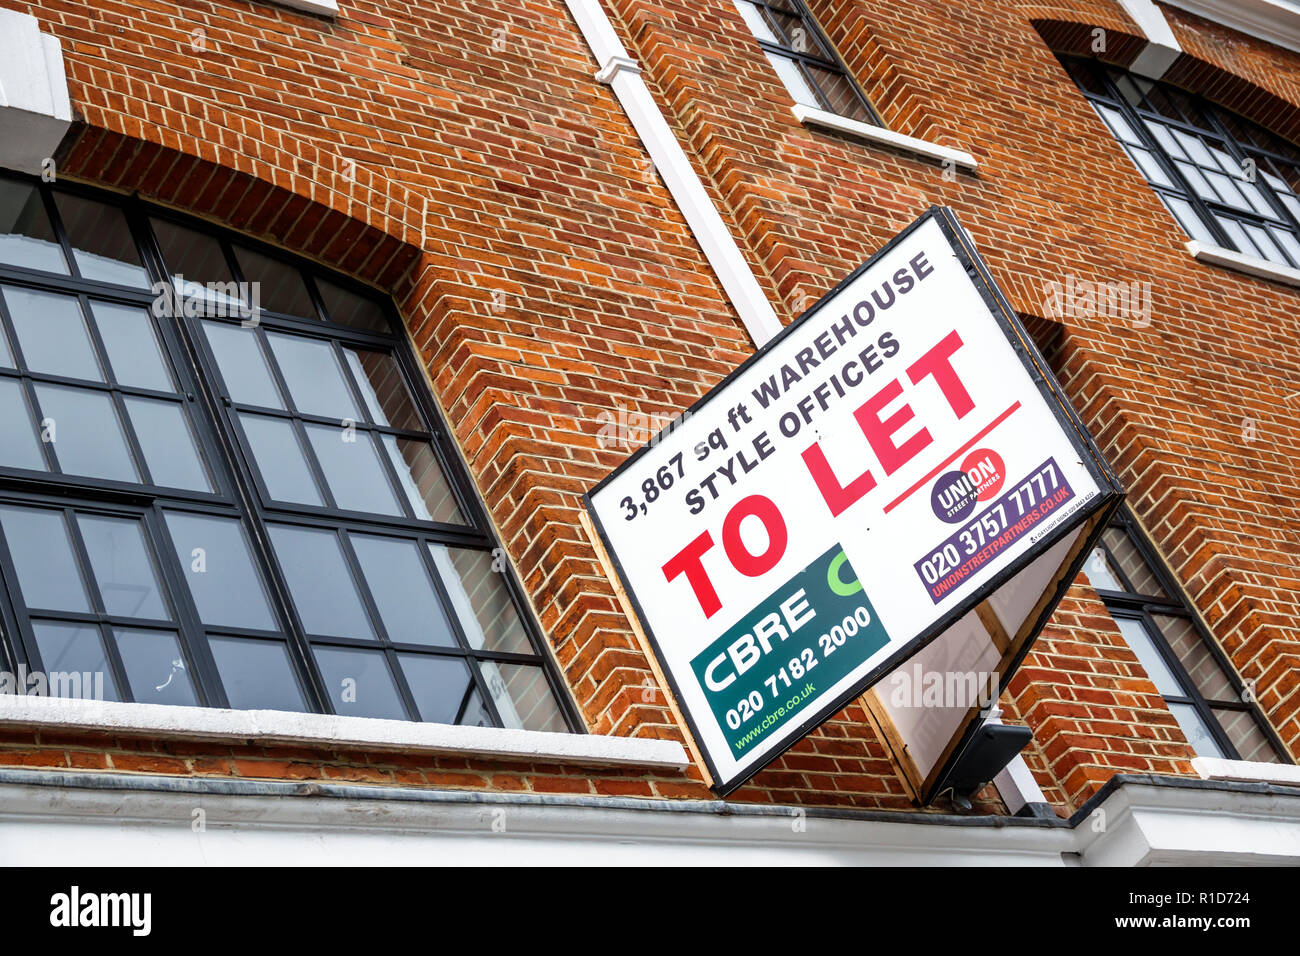 Londra Inghilterra,UK,South Bank Southwark,Union Street,mattone building,commercial real estate,sign,warehouse style offices,rental,to let rent,UK GB Englis Foto Stock